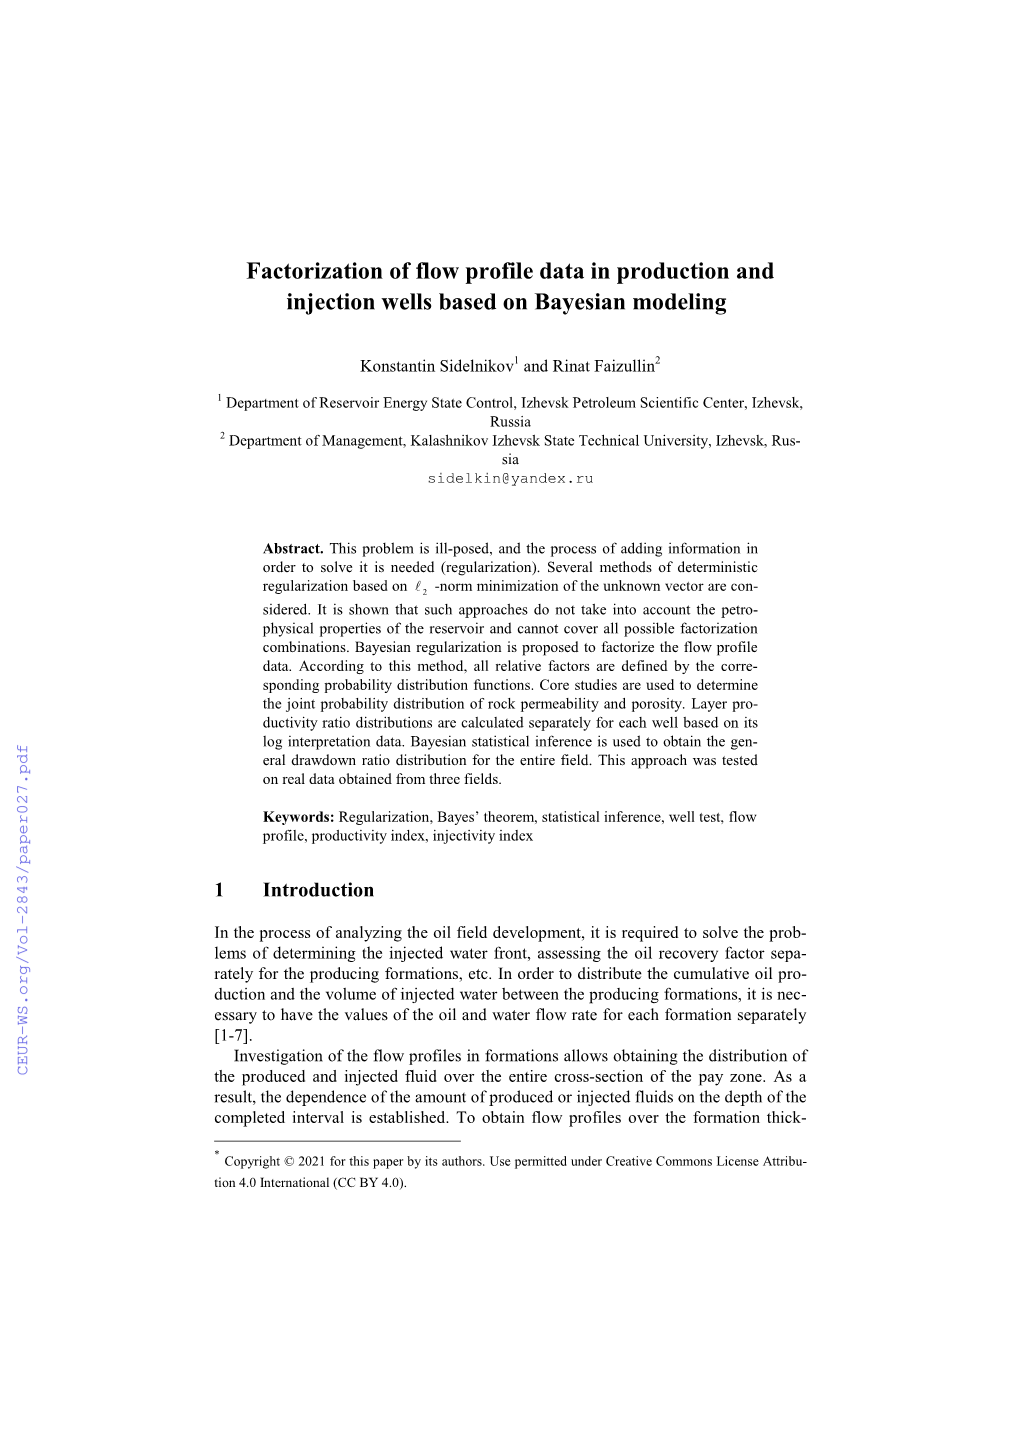 Factorization of Flow Profile Data in Production and Injection Wells Based on Bayesian Modeling*